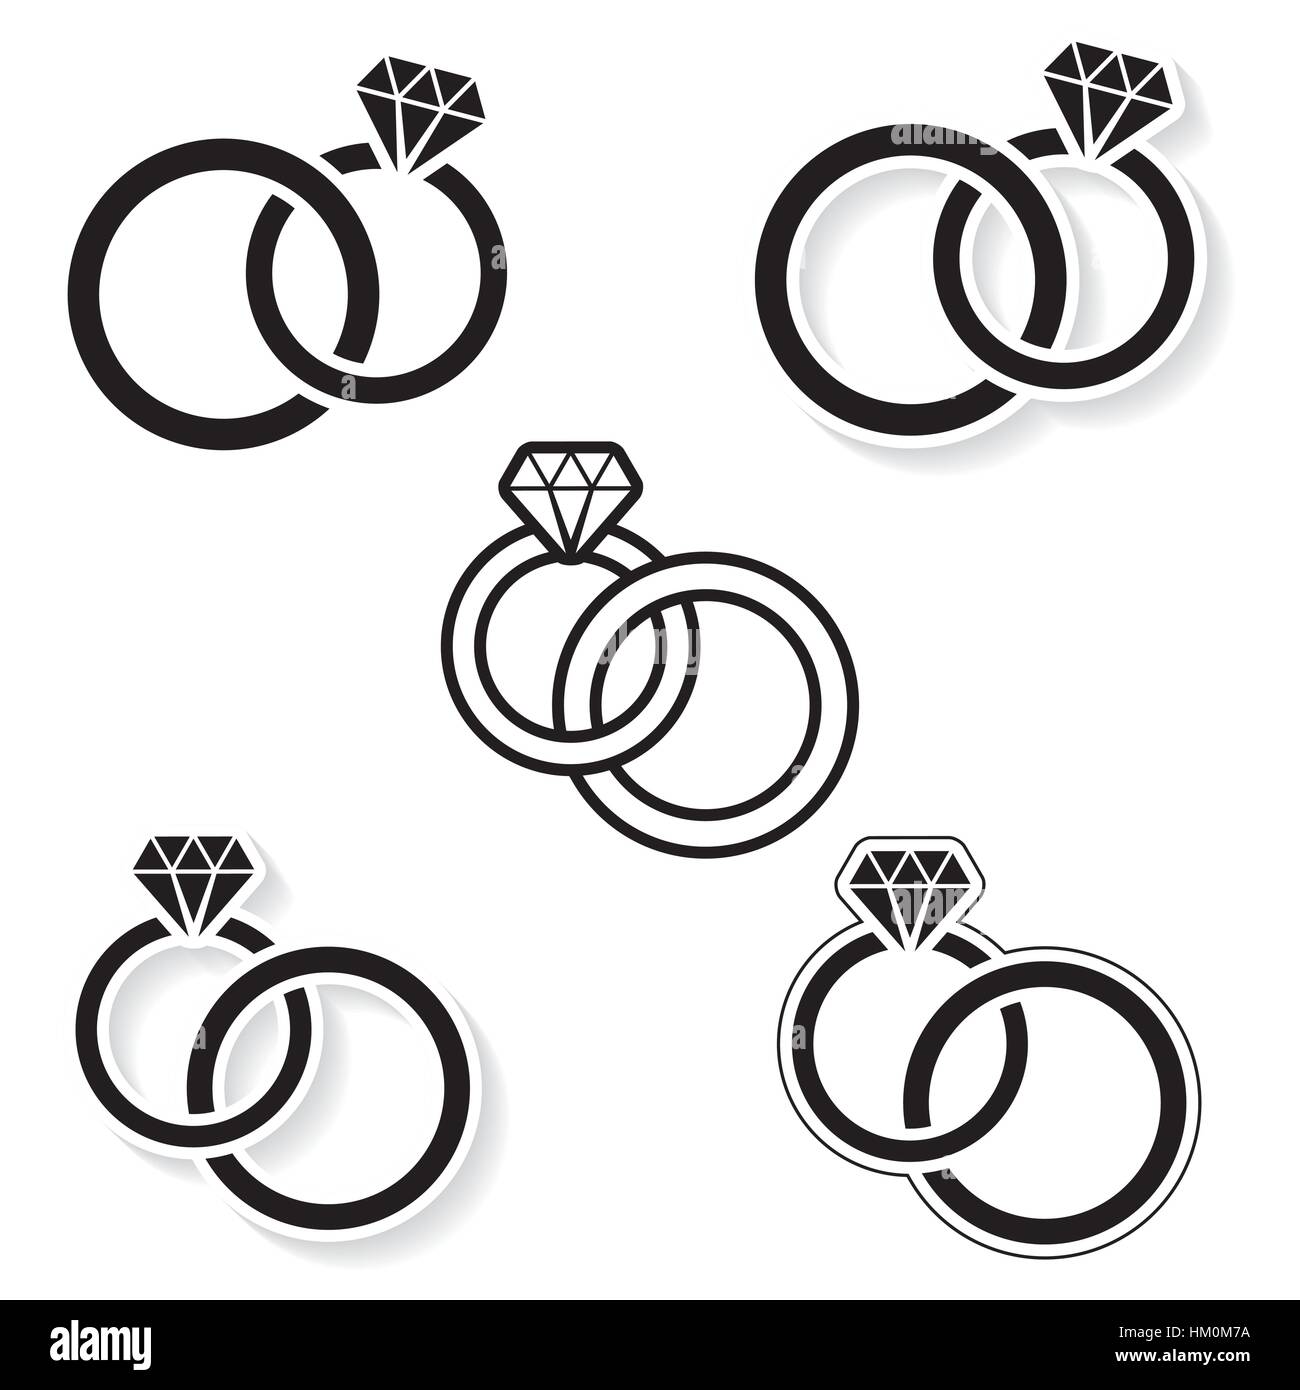 Vector black wedding rings icon on white background Stock Vector